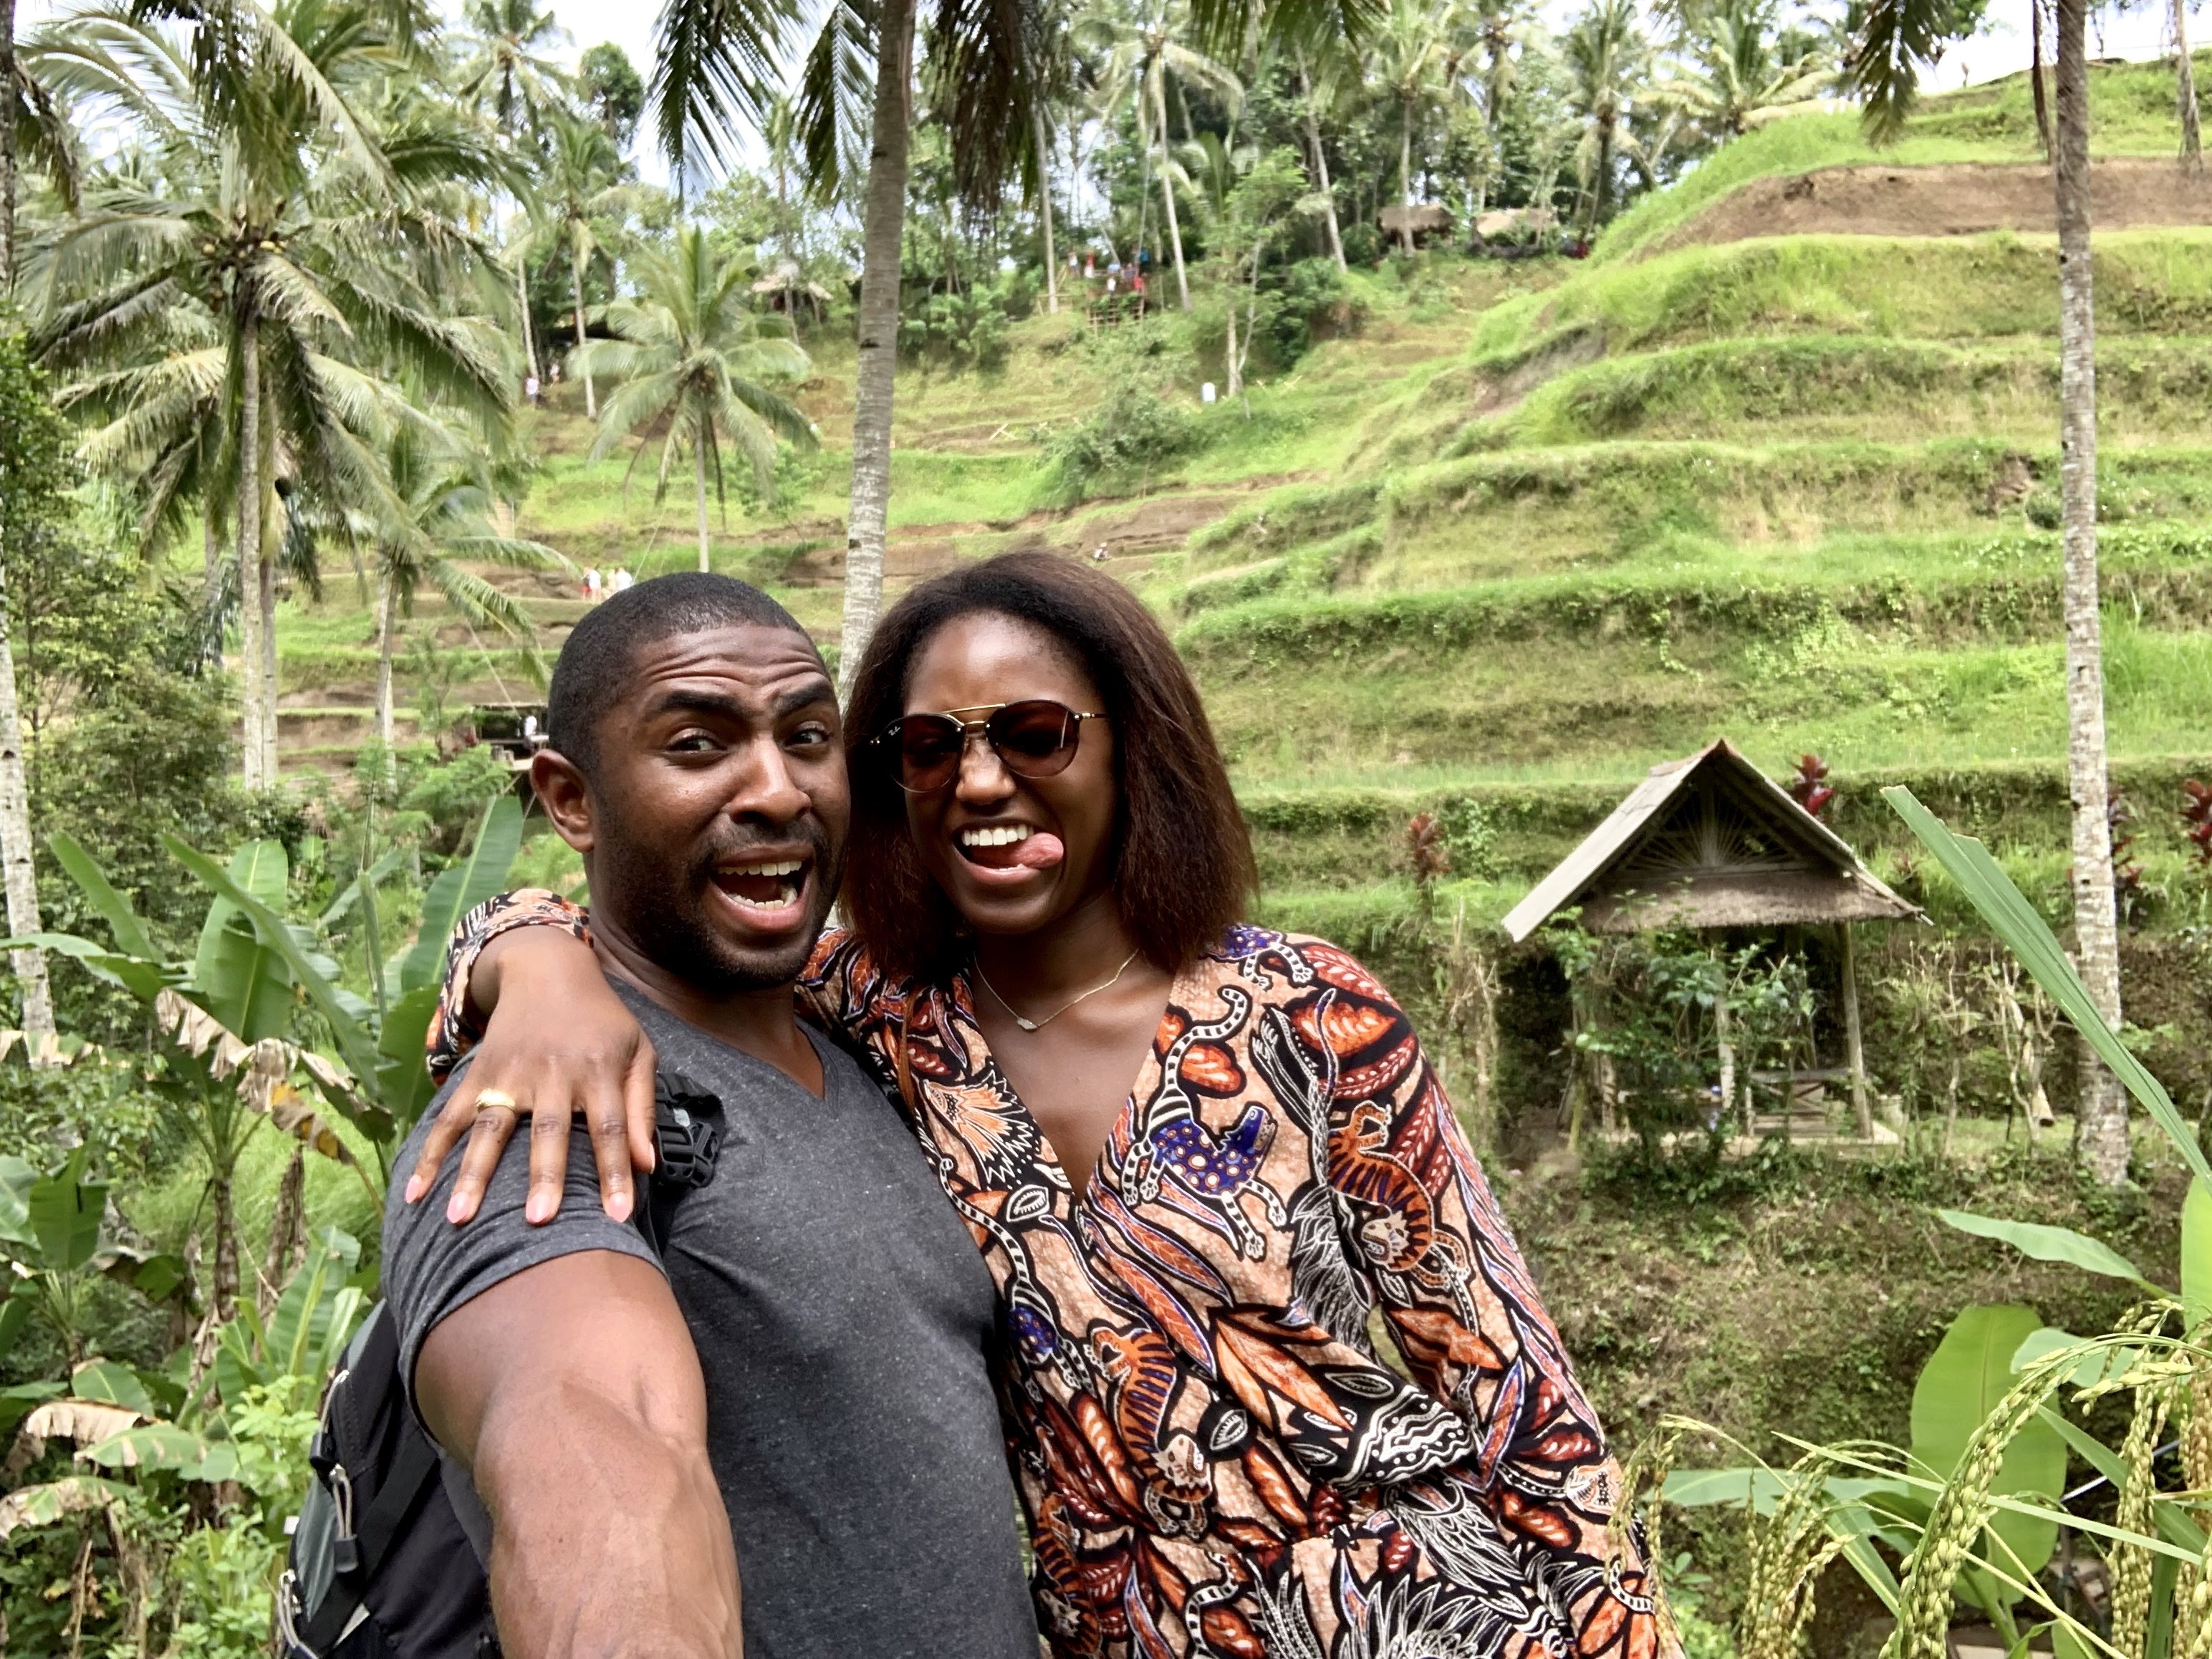 The Black Expat Couple: 'It's Us Against The World'